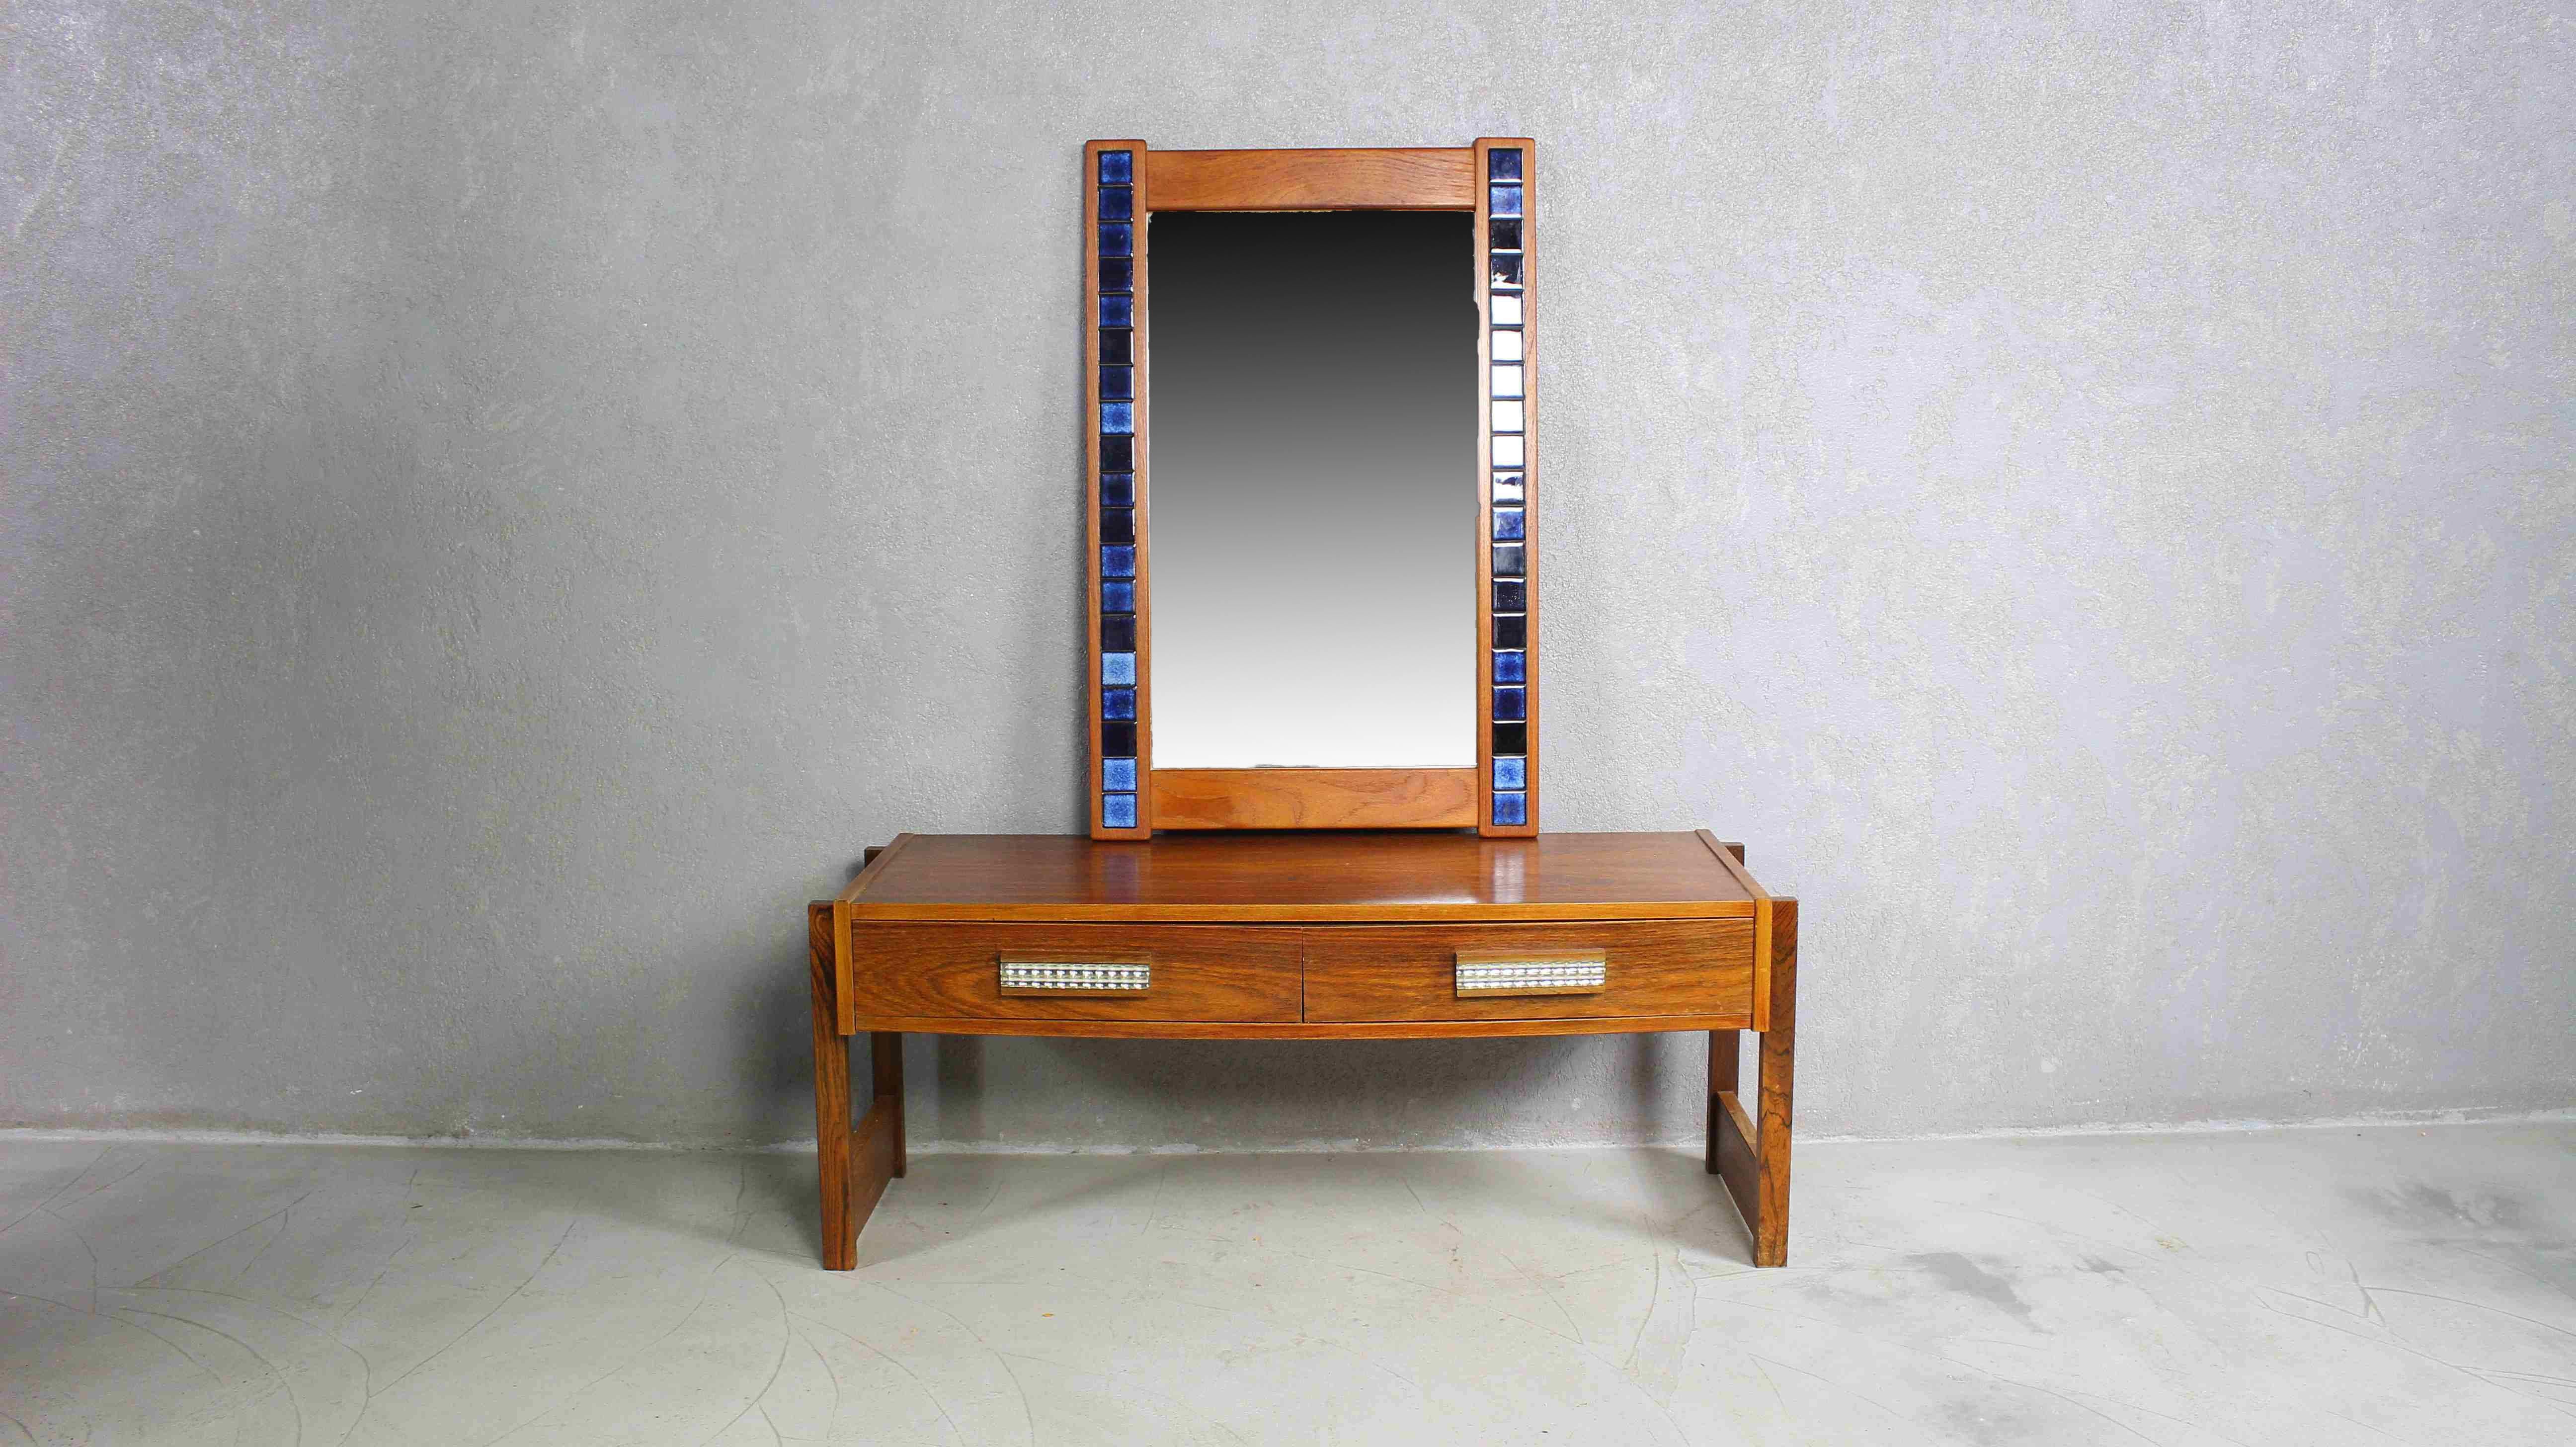 Danish teak console and mirror.
Made of mid century modern era.
Decorated with glass panels.